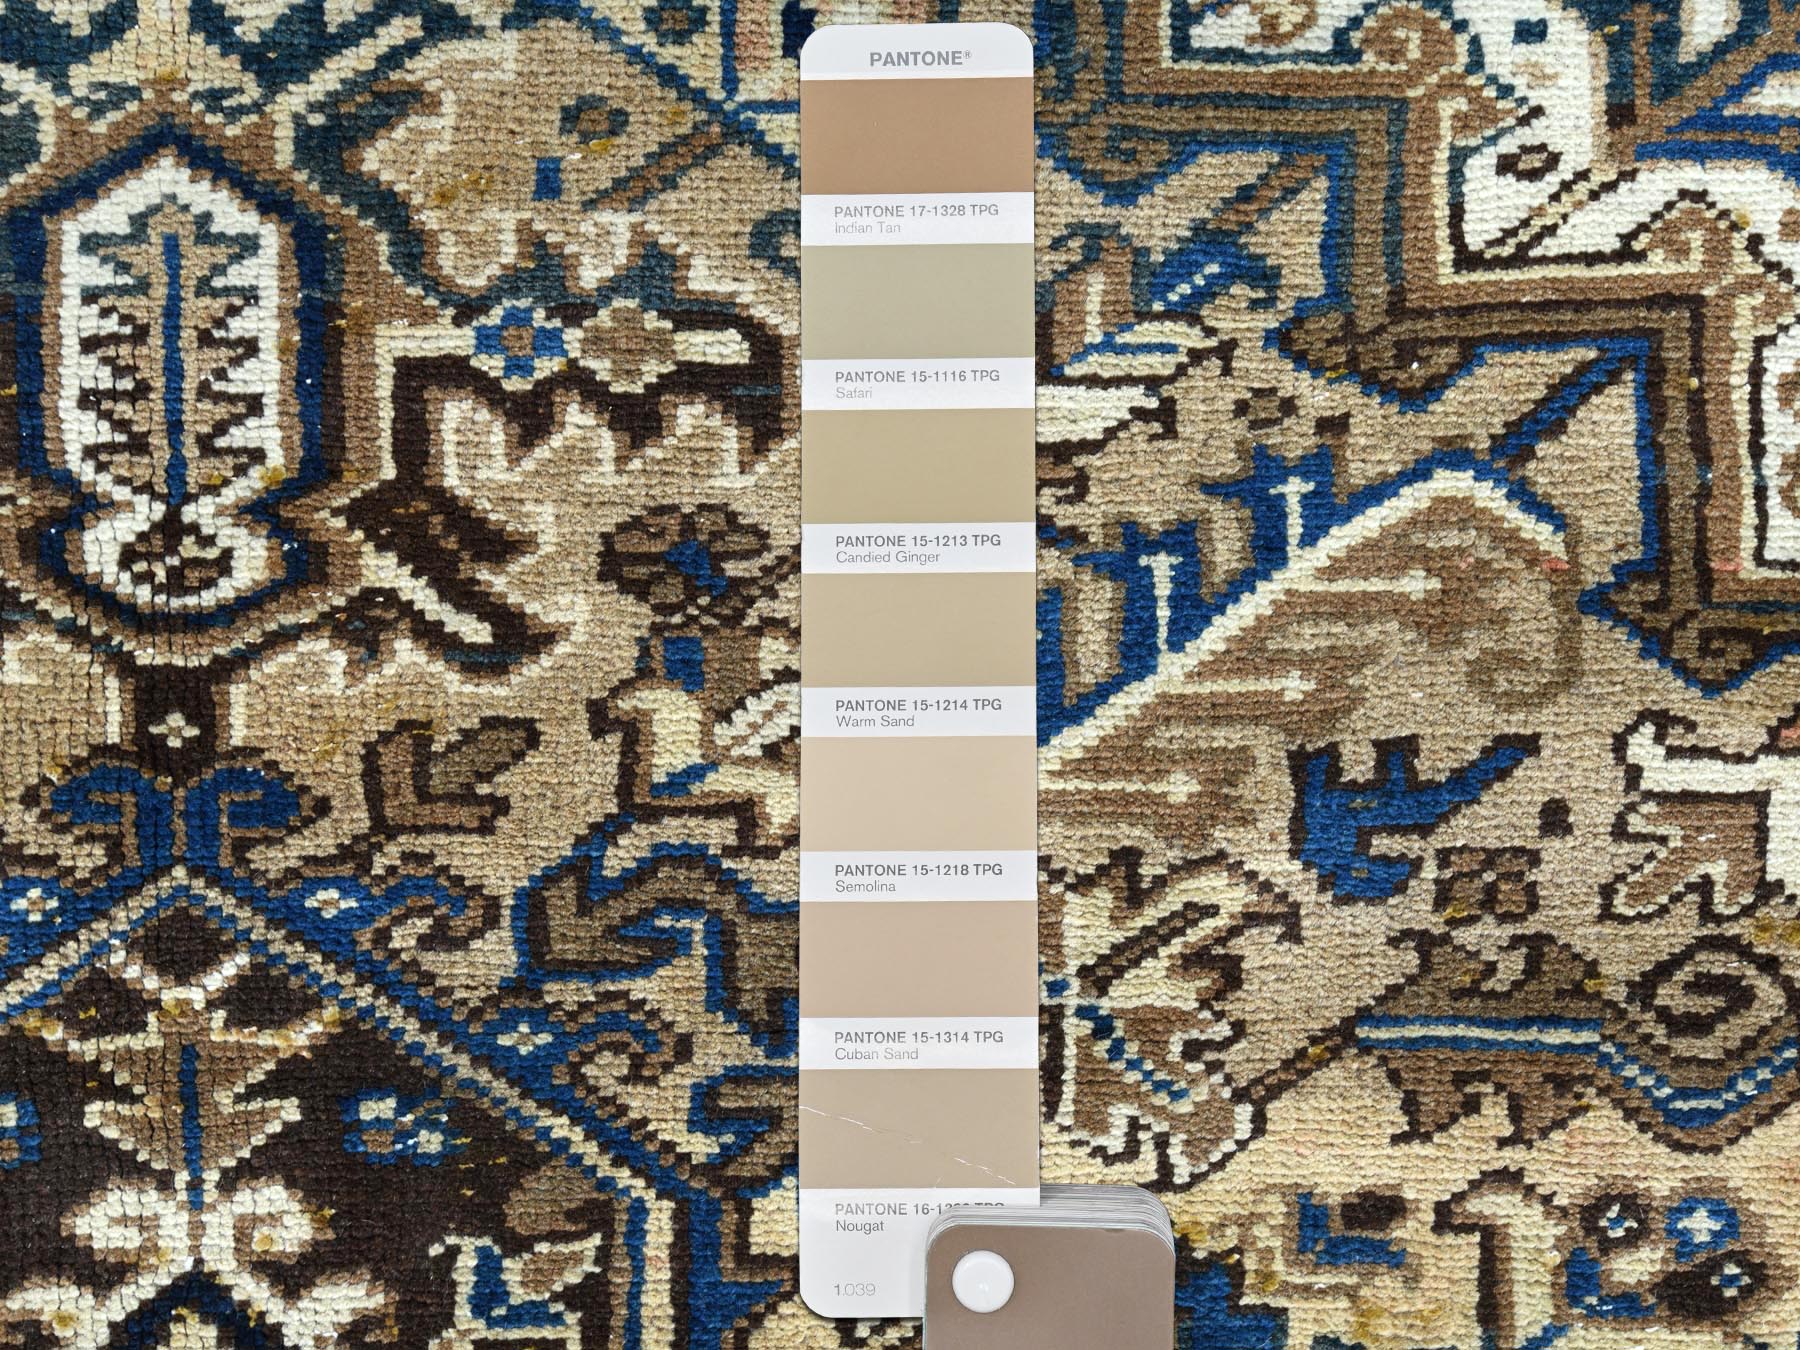 Overdyed & Vintage Rugs LUV731124